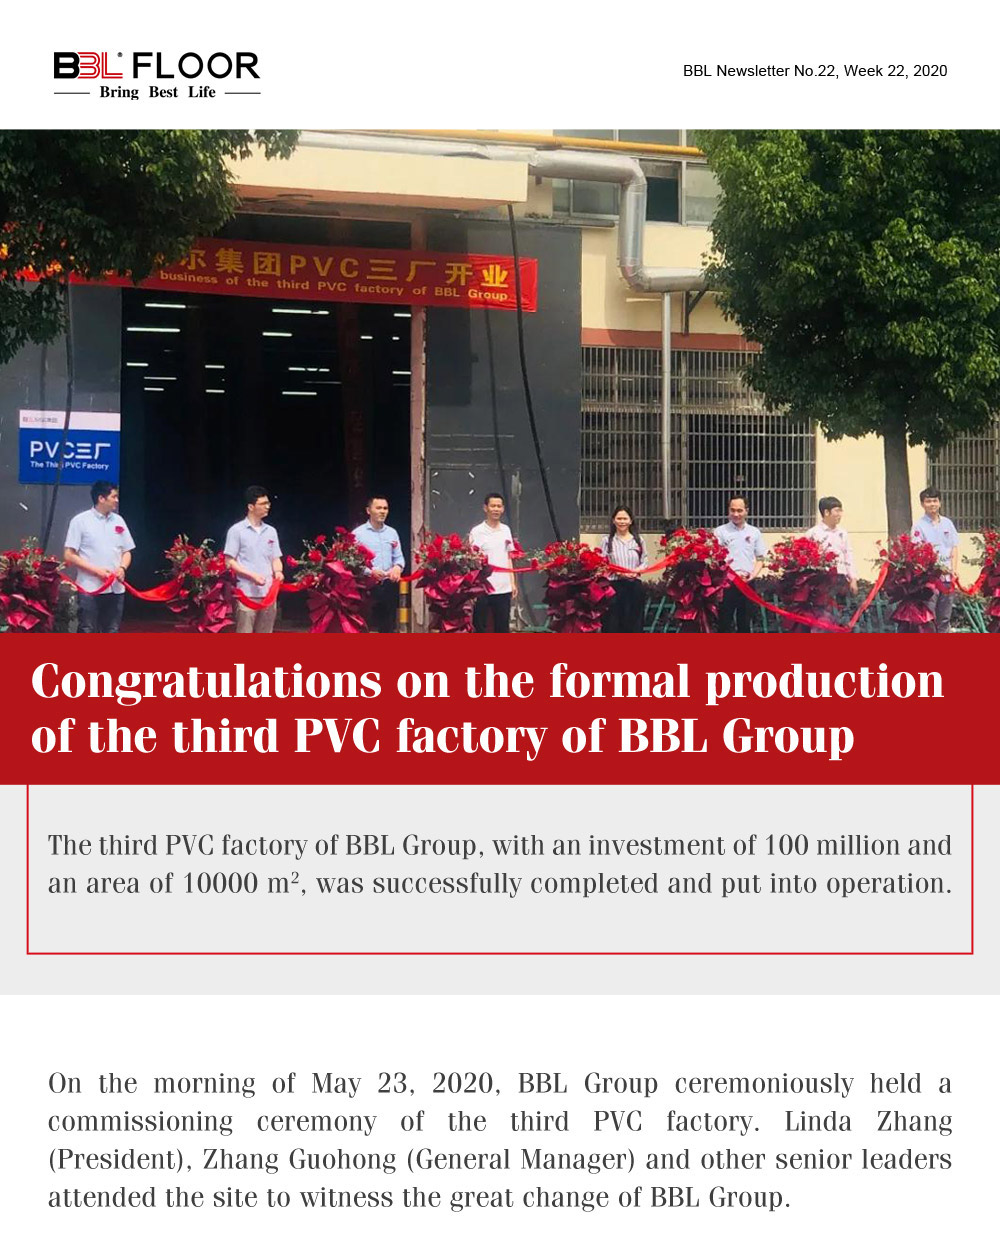 The third PVC factory of BBL Group